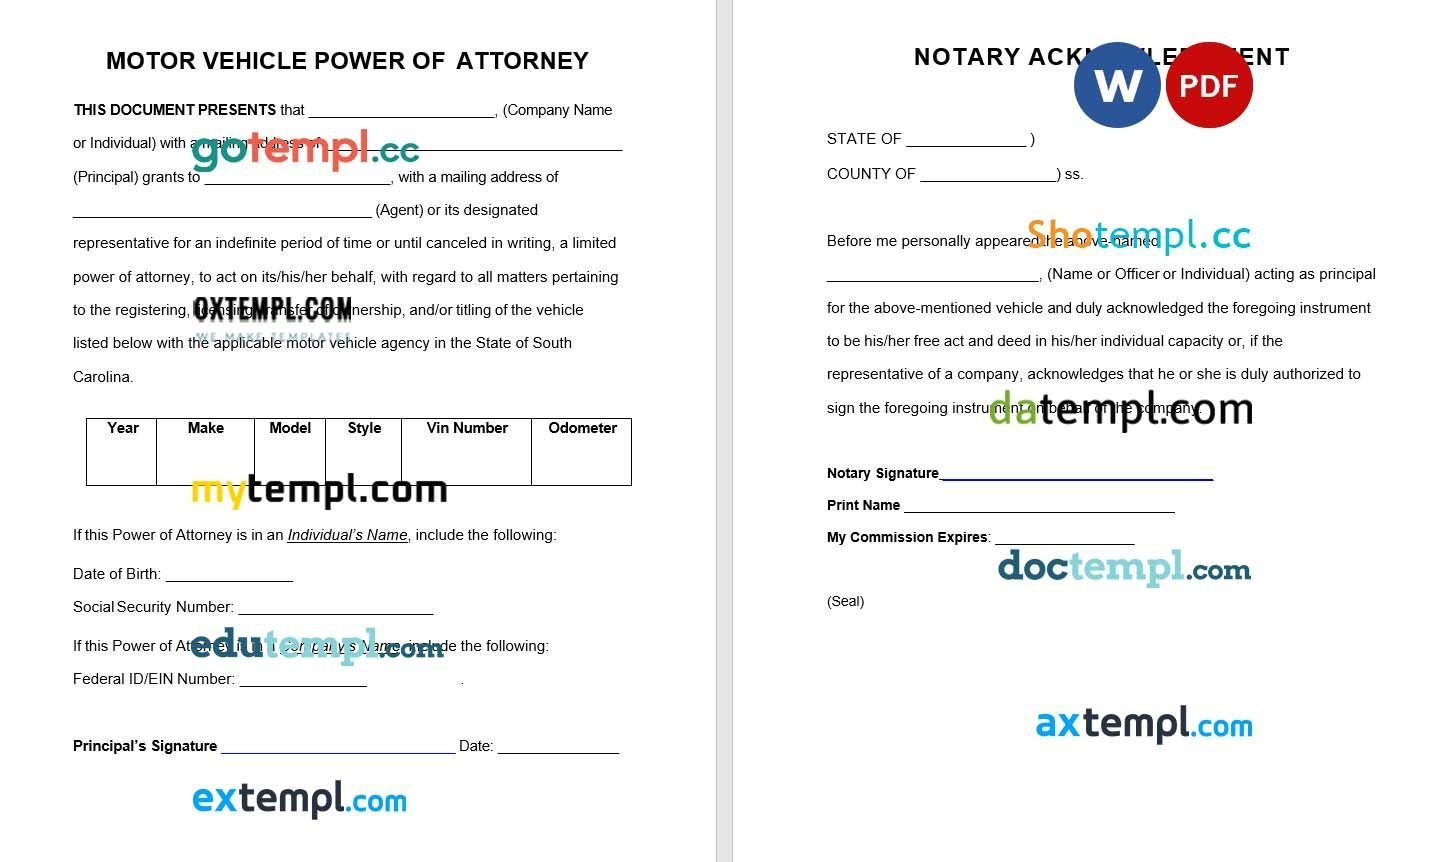 South Carolina Motor Vehicle Power of Attorney Form example, fully editable